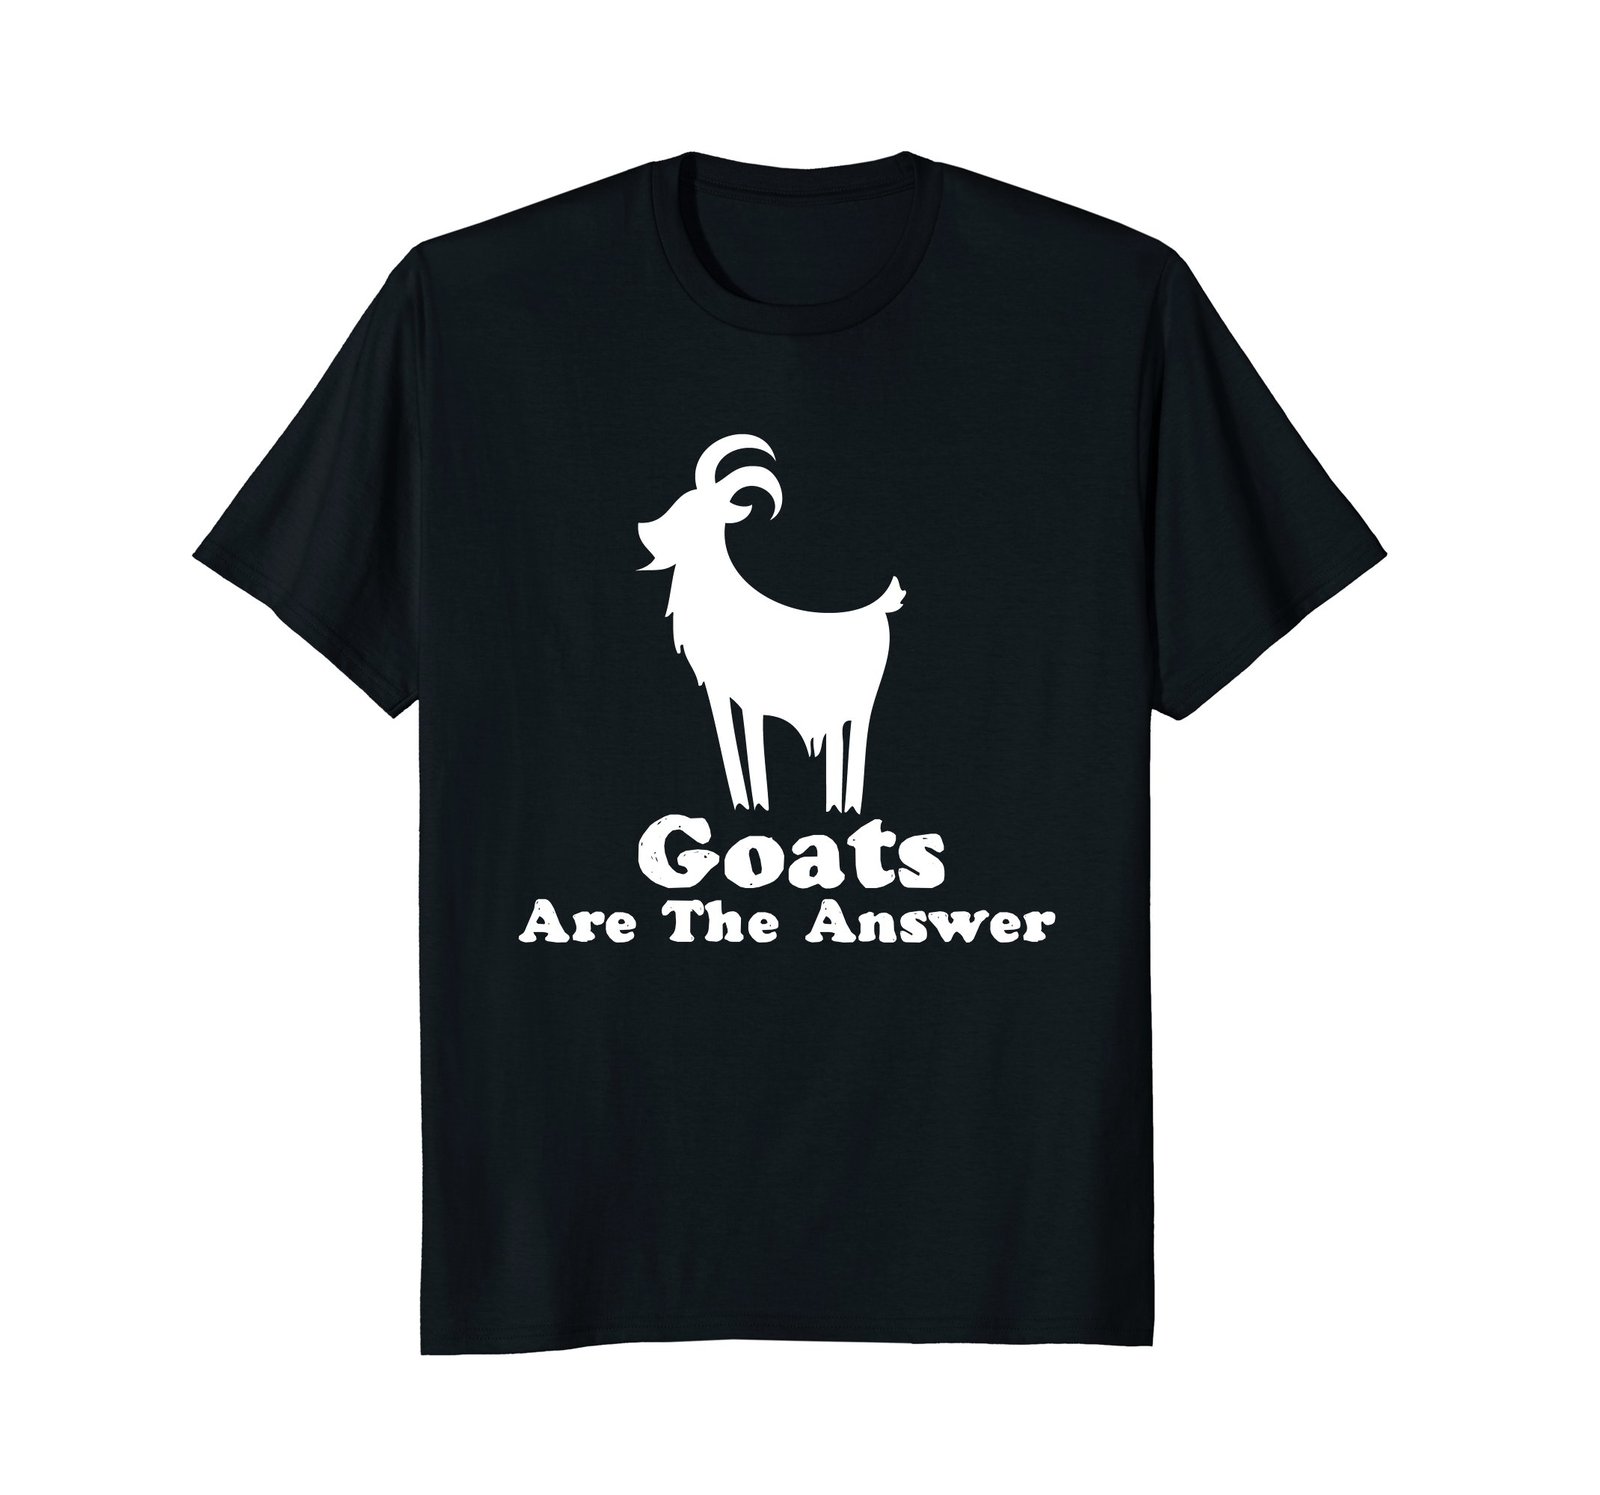 Goats Are The Answer Funny T-Shirt - T-Shirts, Tank Tops